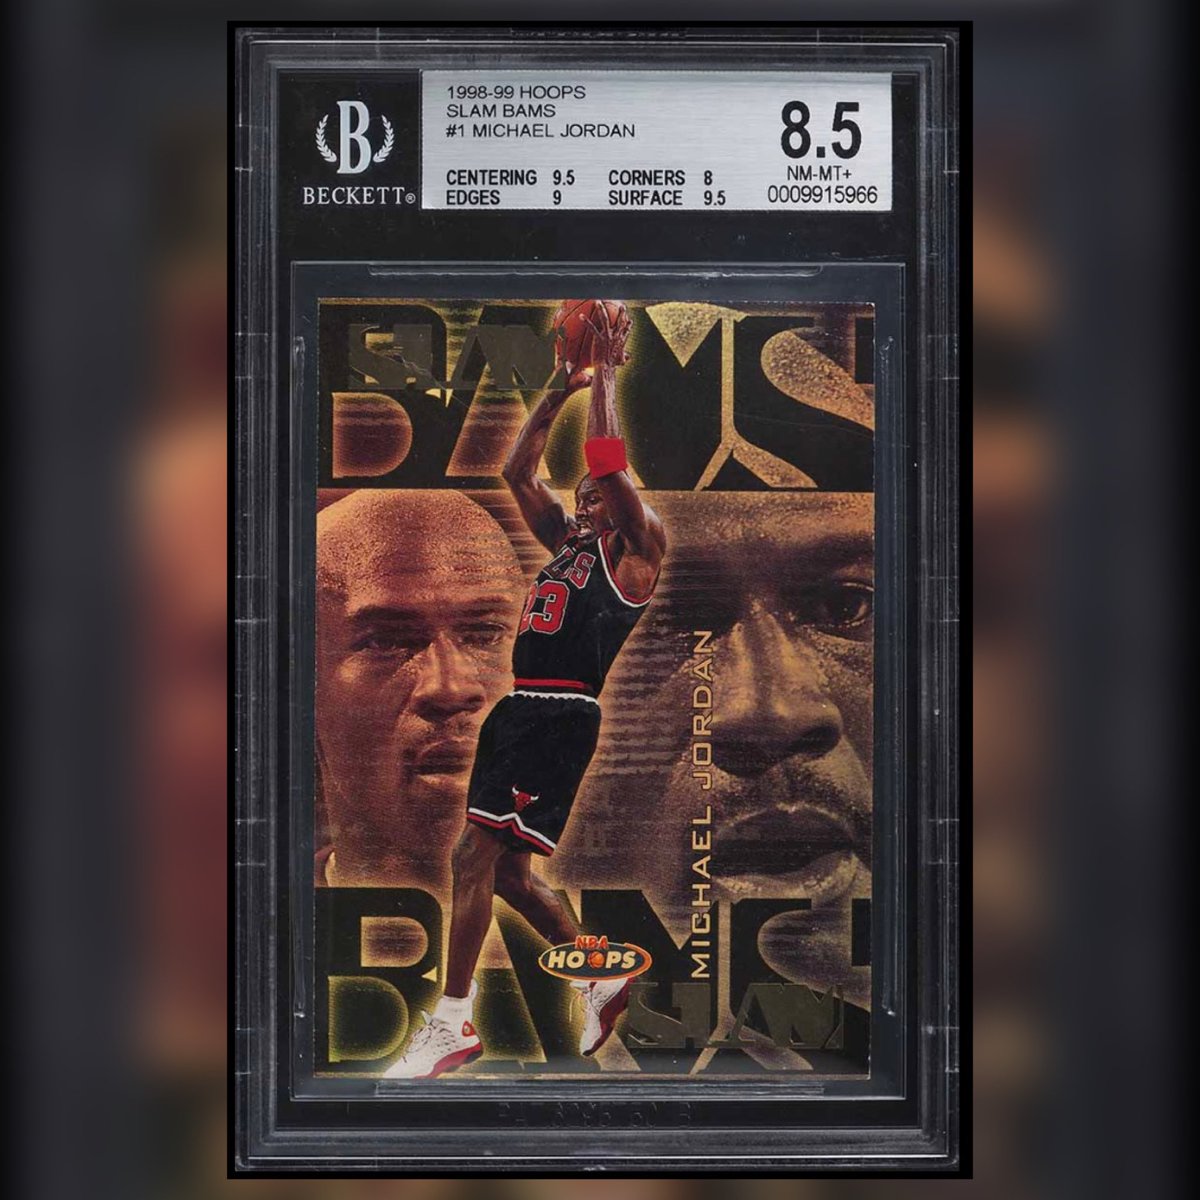 The countdown continues… the #12 best item in my collection.

Michael Jordan 1998-99 Hoops Slam Bams /100 BGS 8.5

A few thoughts on this one - (1/) https://t.co/Aqu1lqmhEL